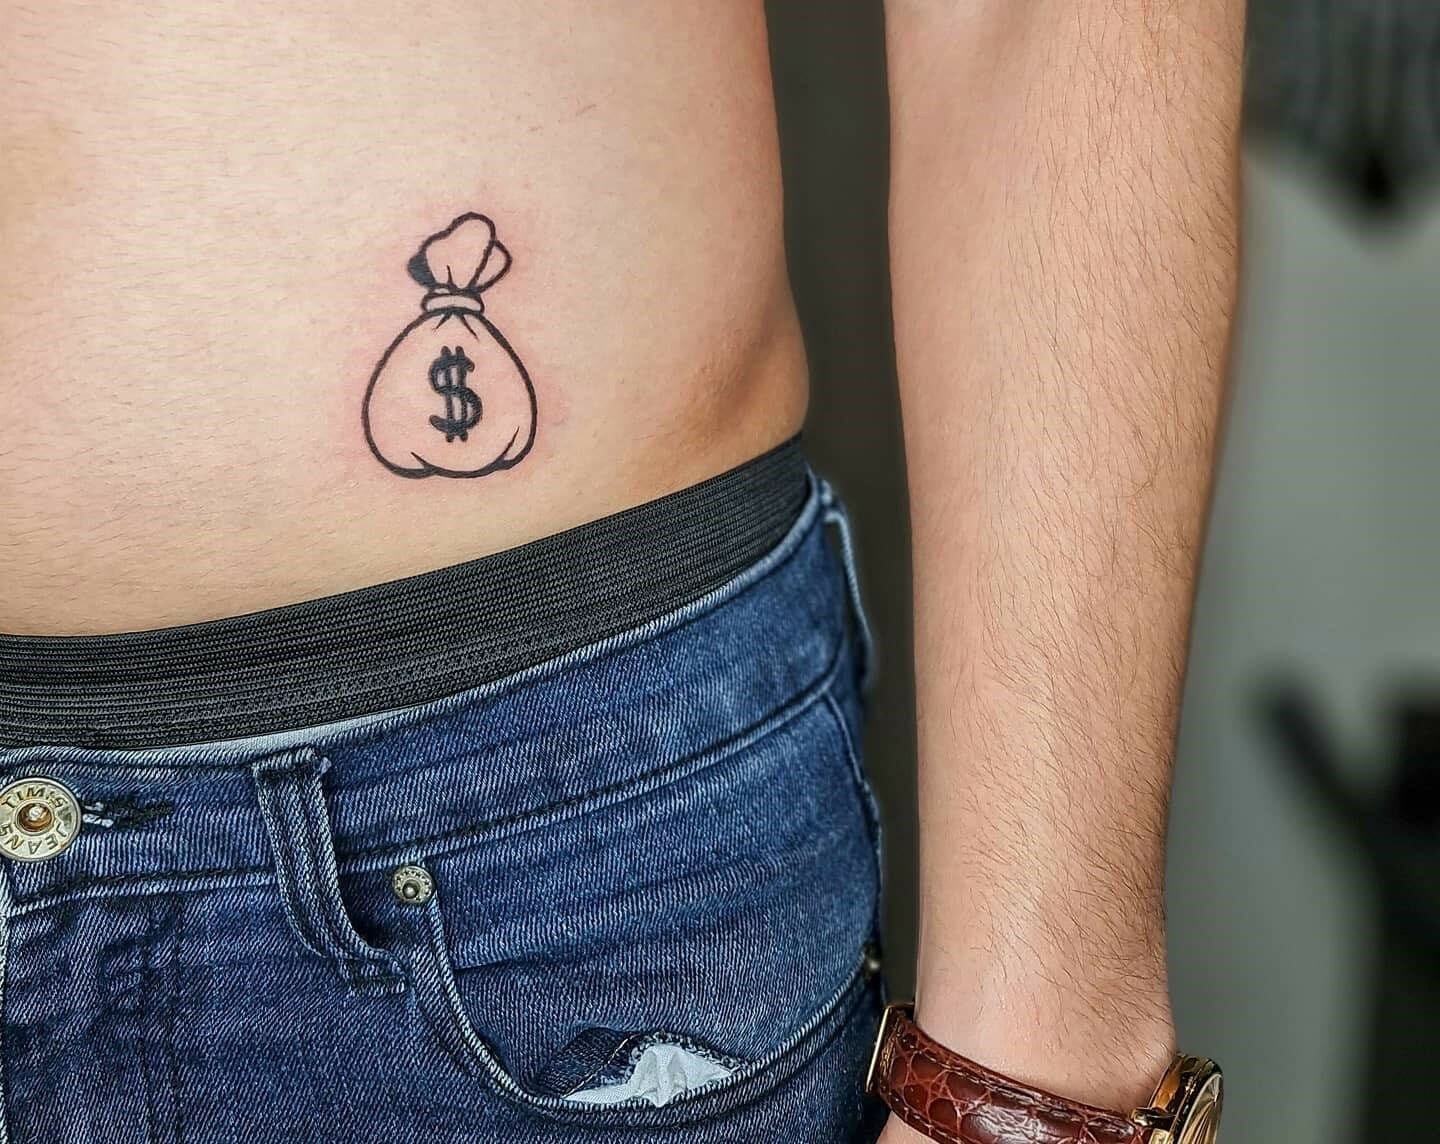 10 Best Simple Money Bag Tattoo Ideas That Will Blow Your Mind! | Outsons | Men's Fashion Tips And Style Guides